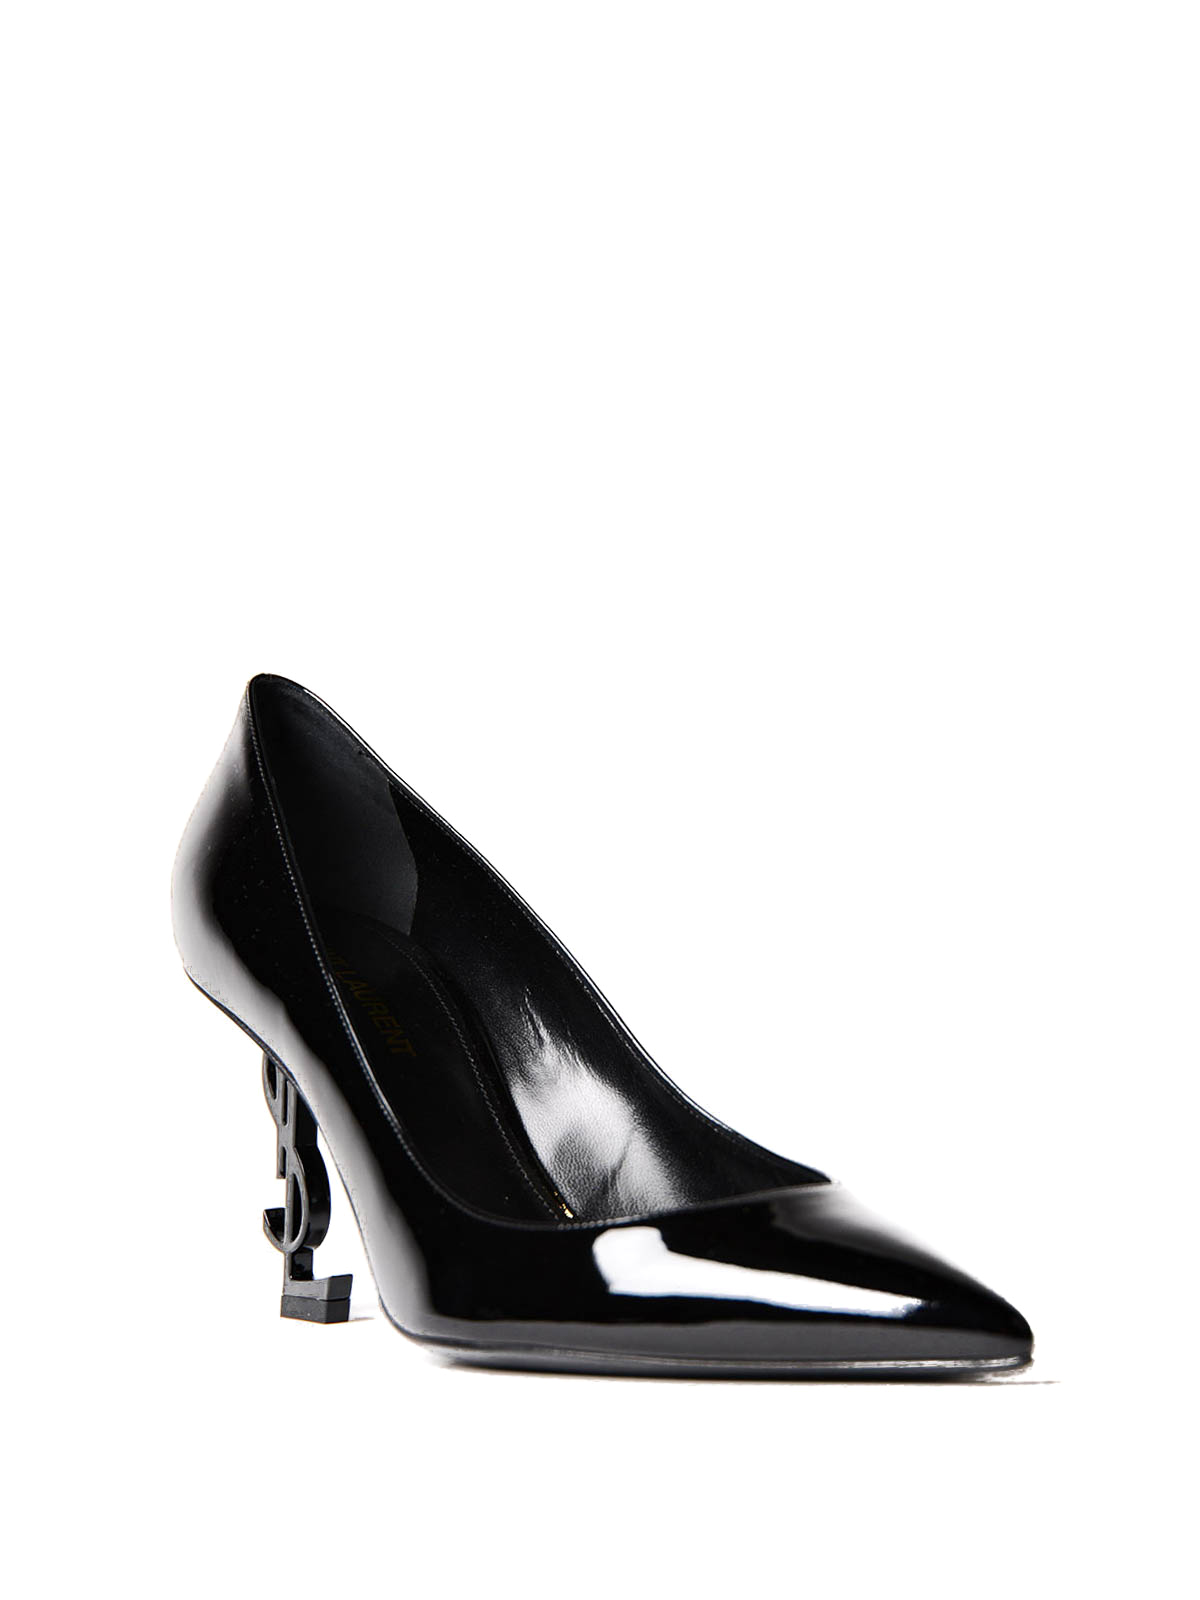 ysl shoes online